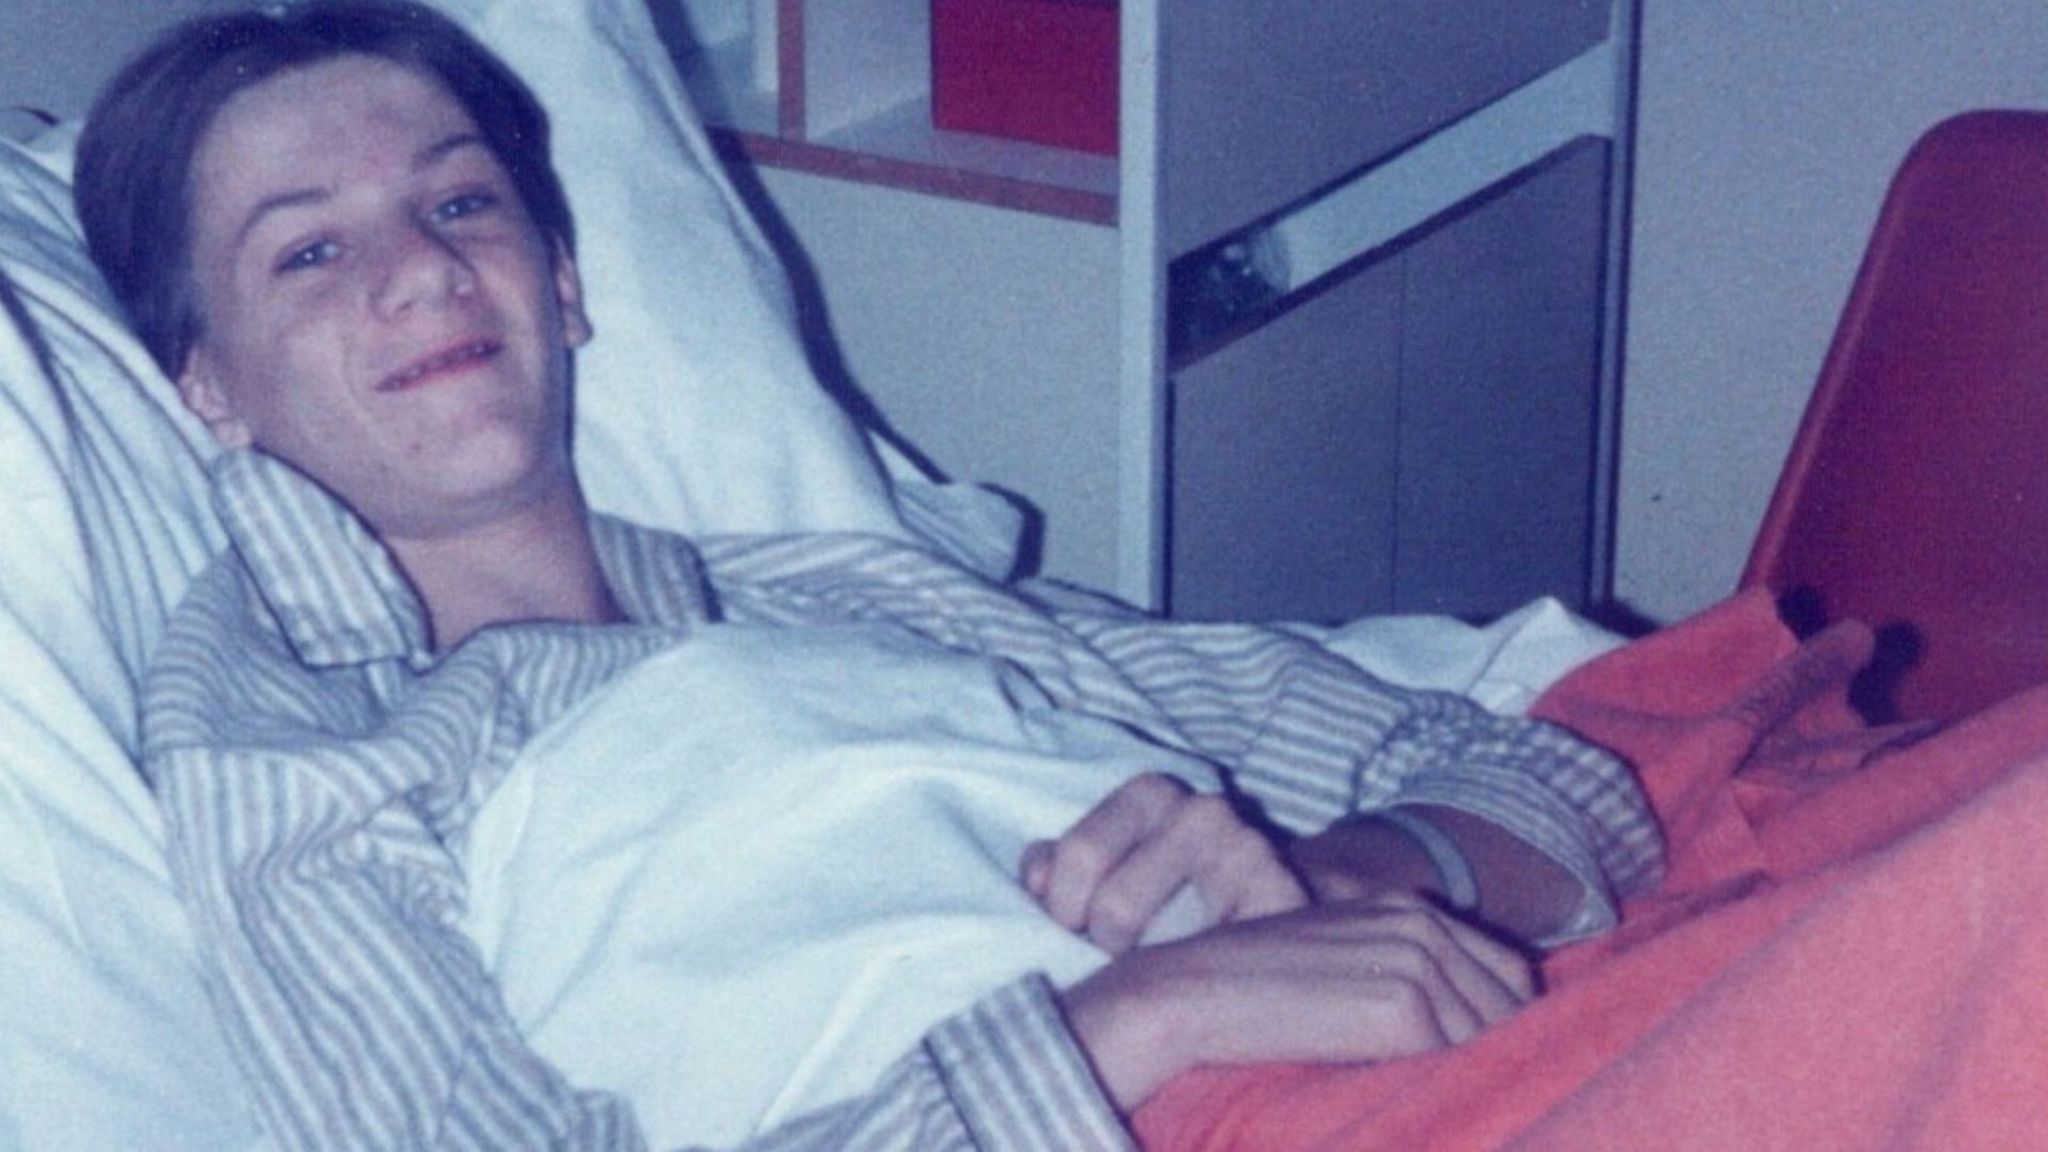 Mark Ward, aged 14, in a hospital bed 